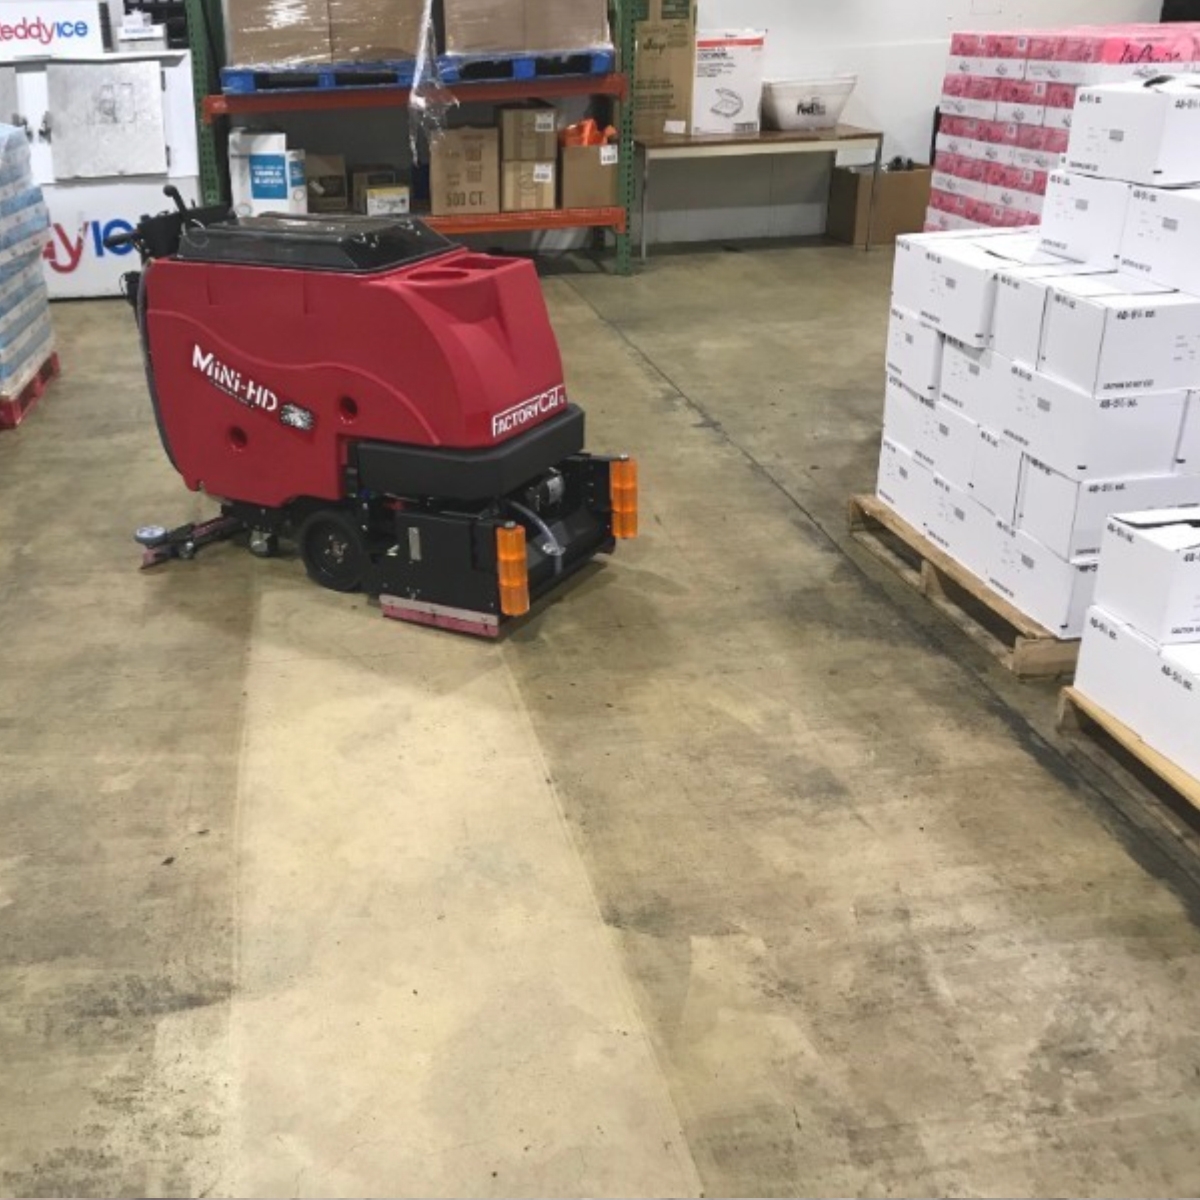 Southern Sweepers MINI-HD from Factory Cat walk-behind scrubber tackling a touch industrial floor.